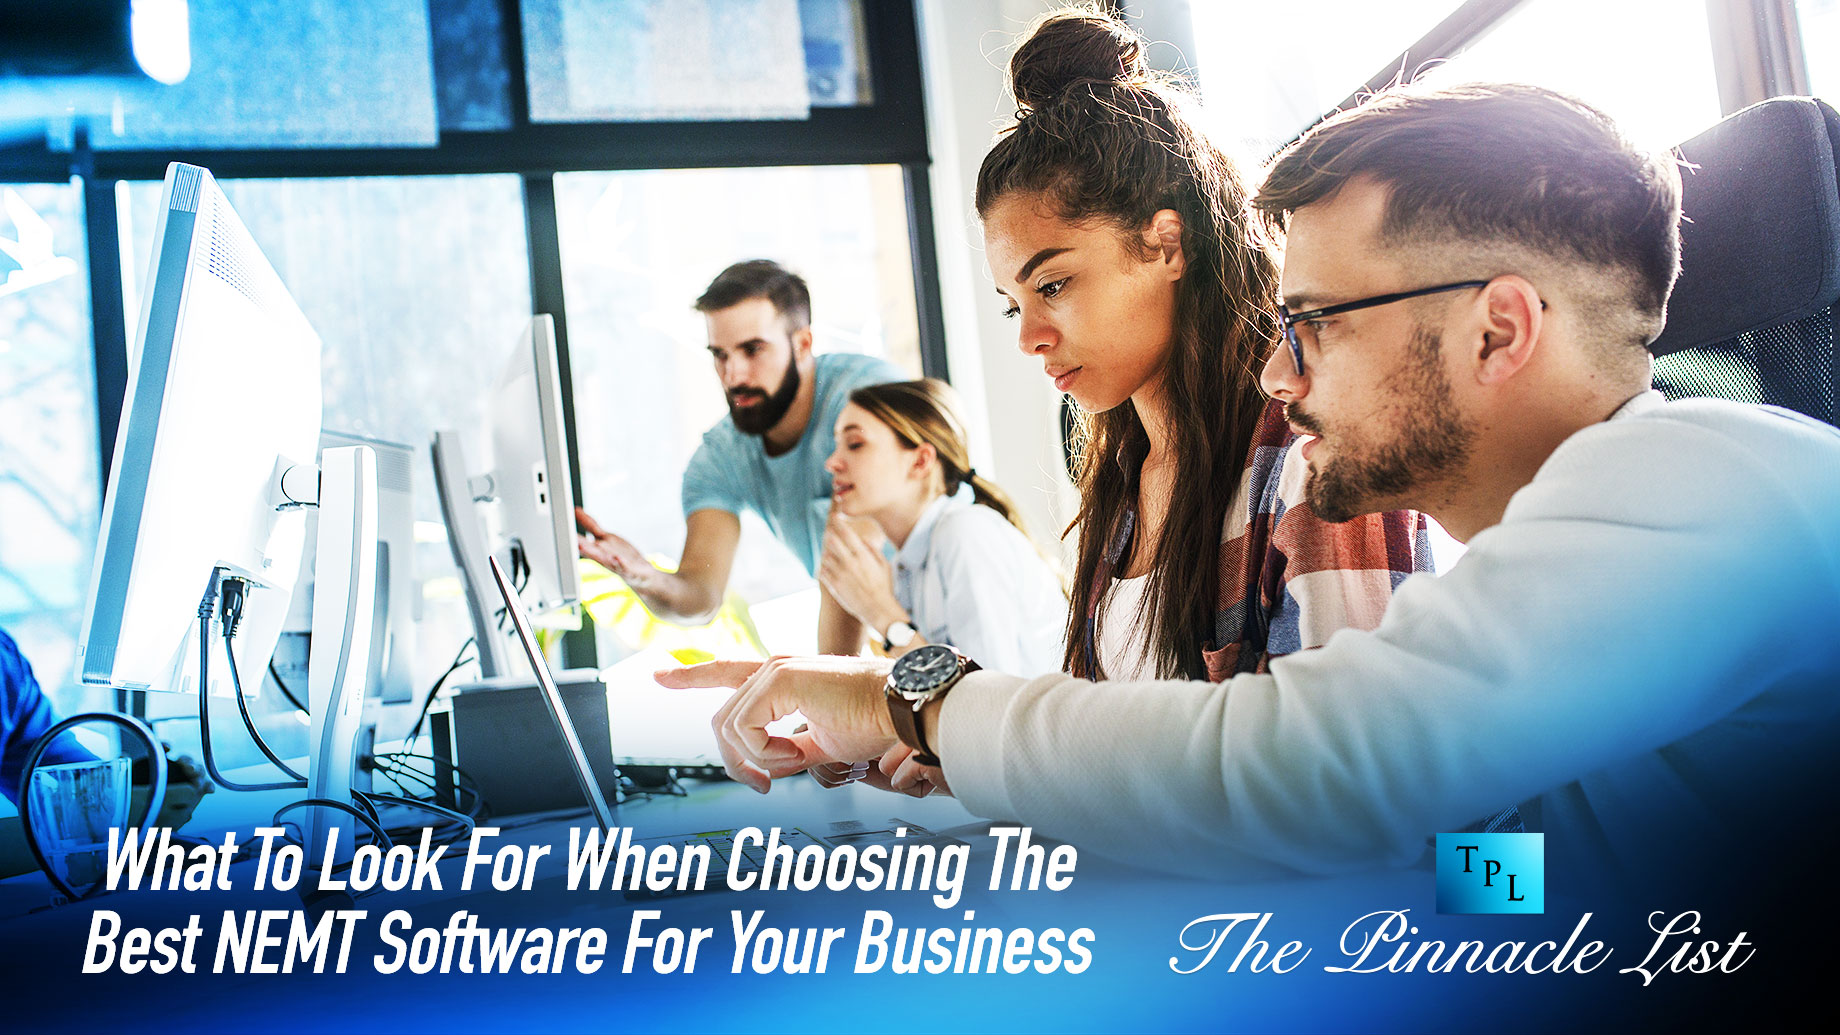 What To Look For When Choosing The Best NEMT Software For Your Business